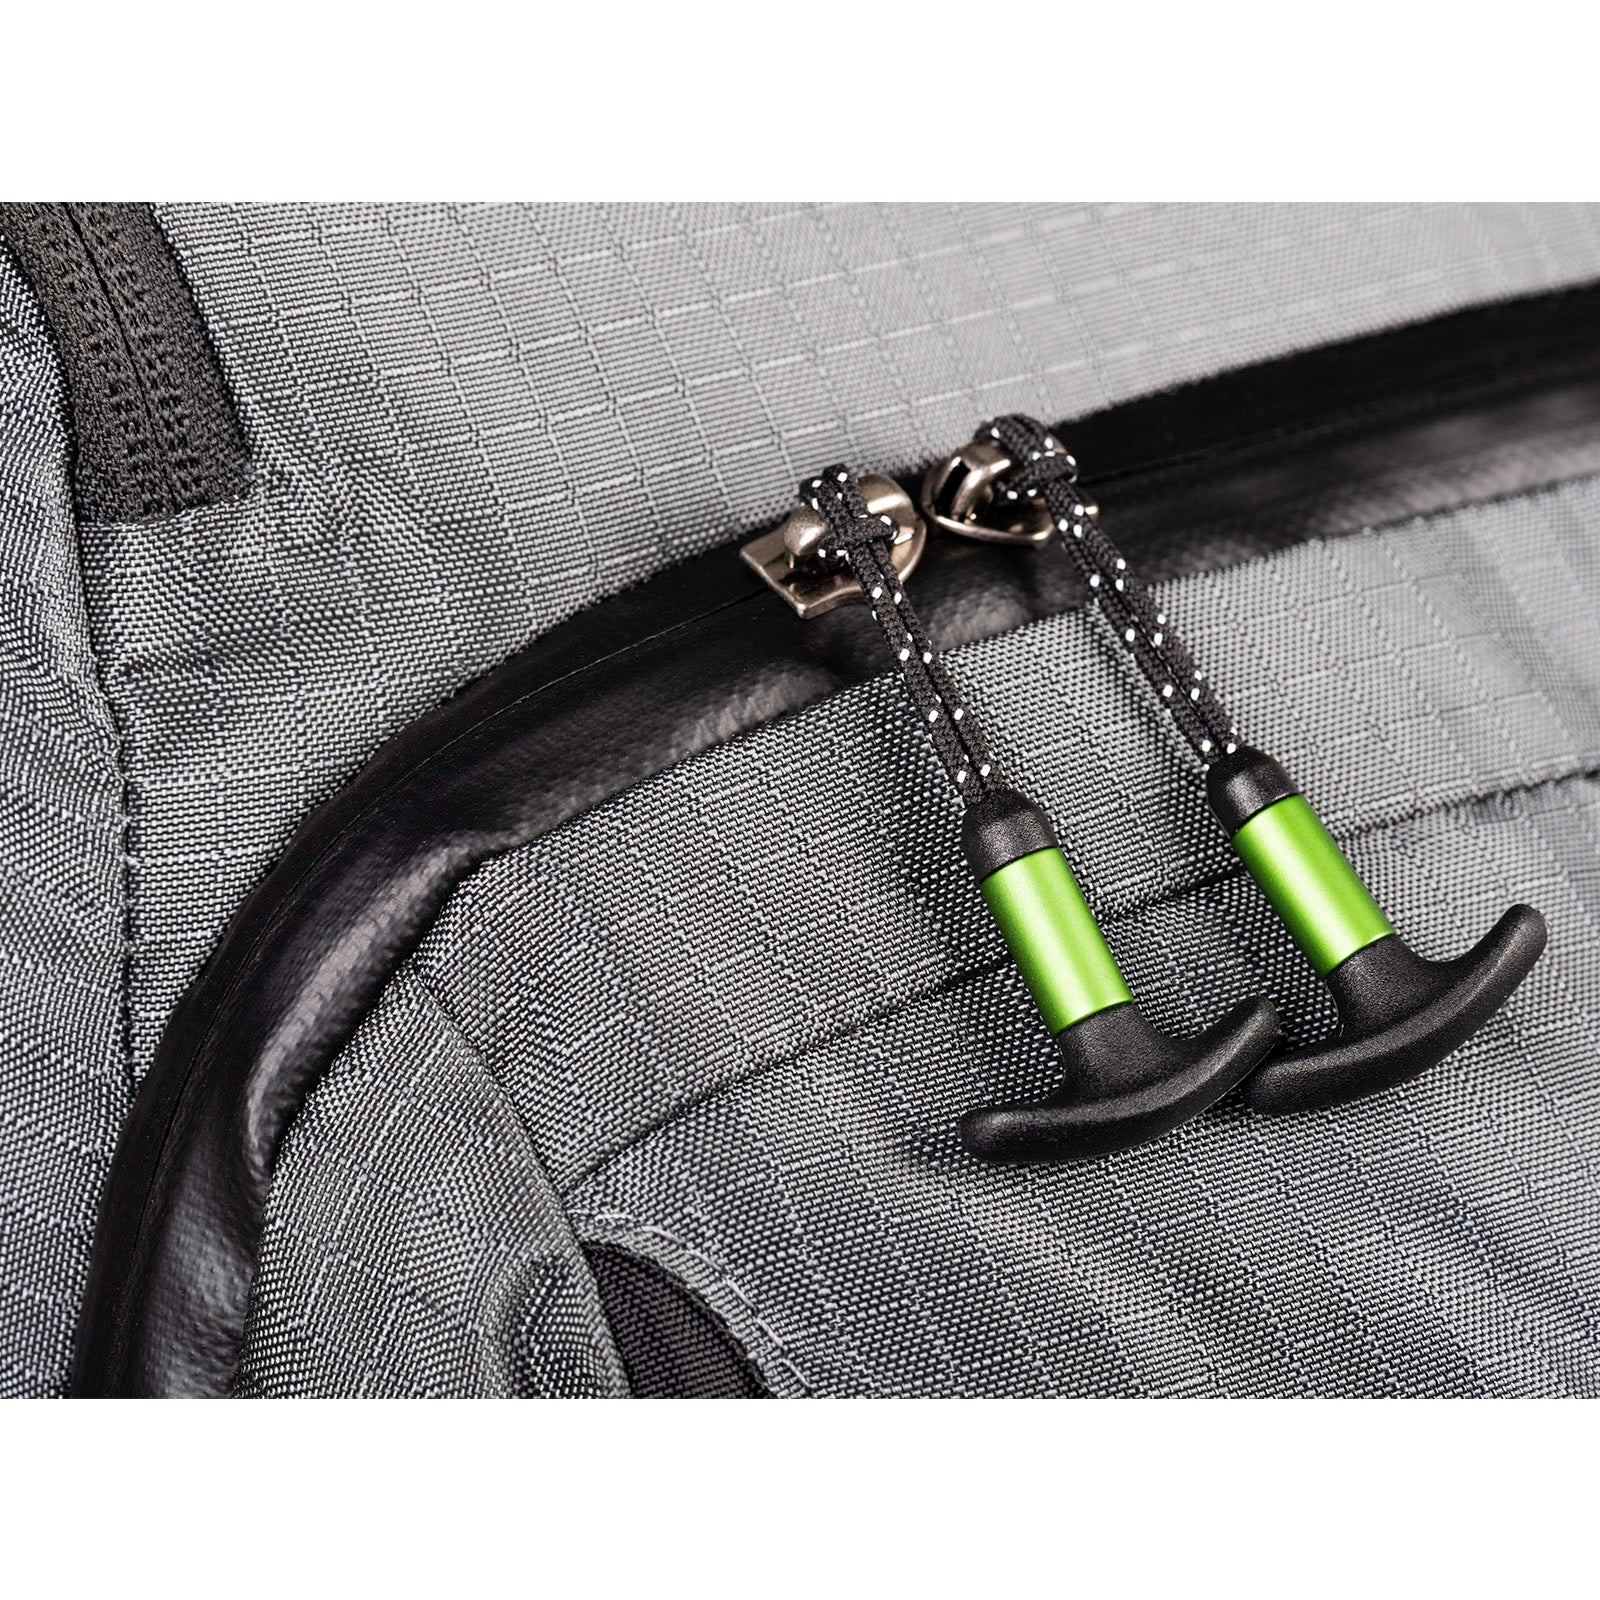 Storm proof construction with YKK® AquaGuard® zippers and waterproof/tearproof Sailcloth